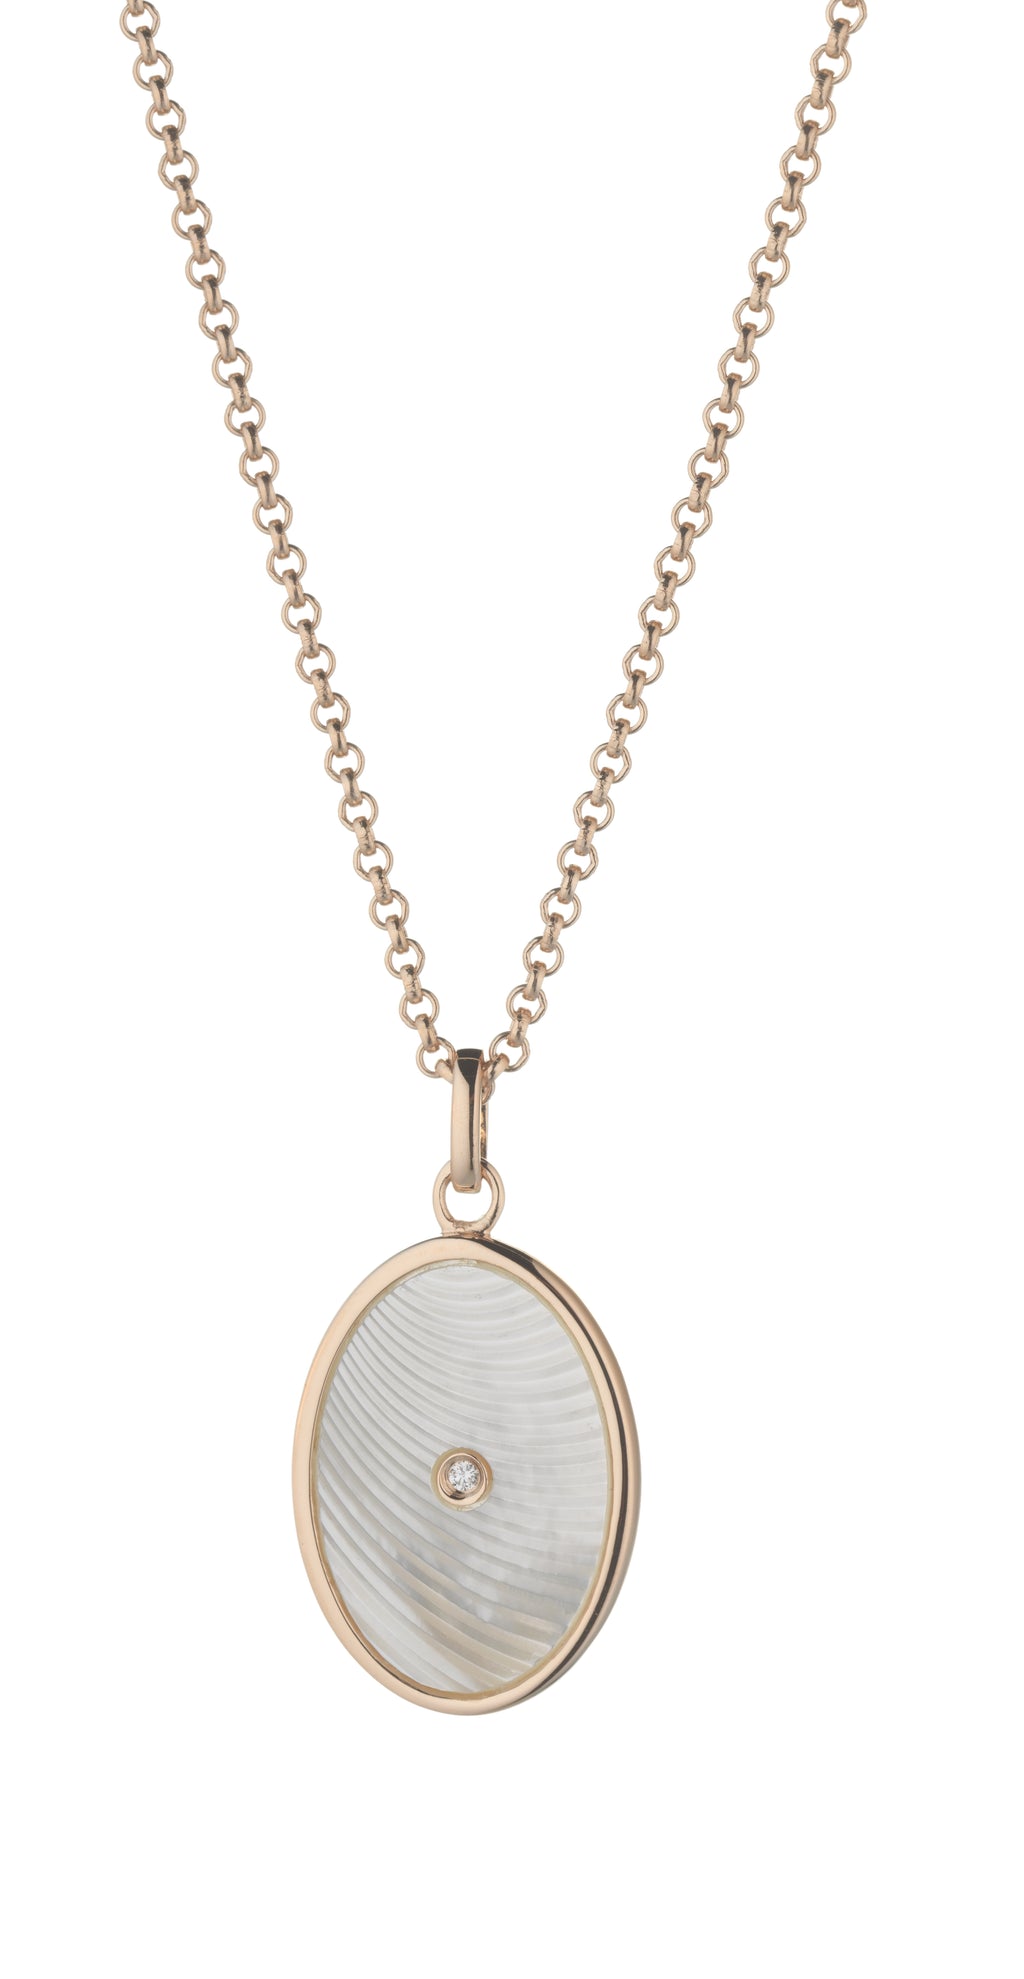 Moika Oval Pendant Necklace